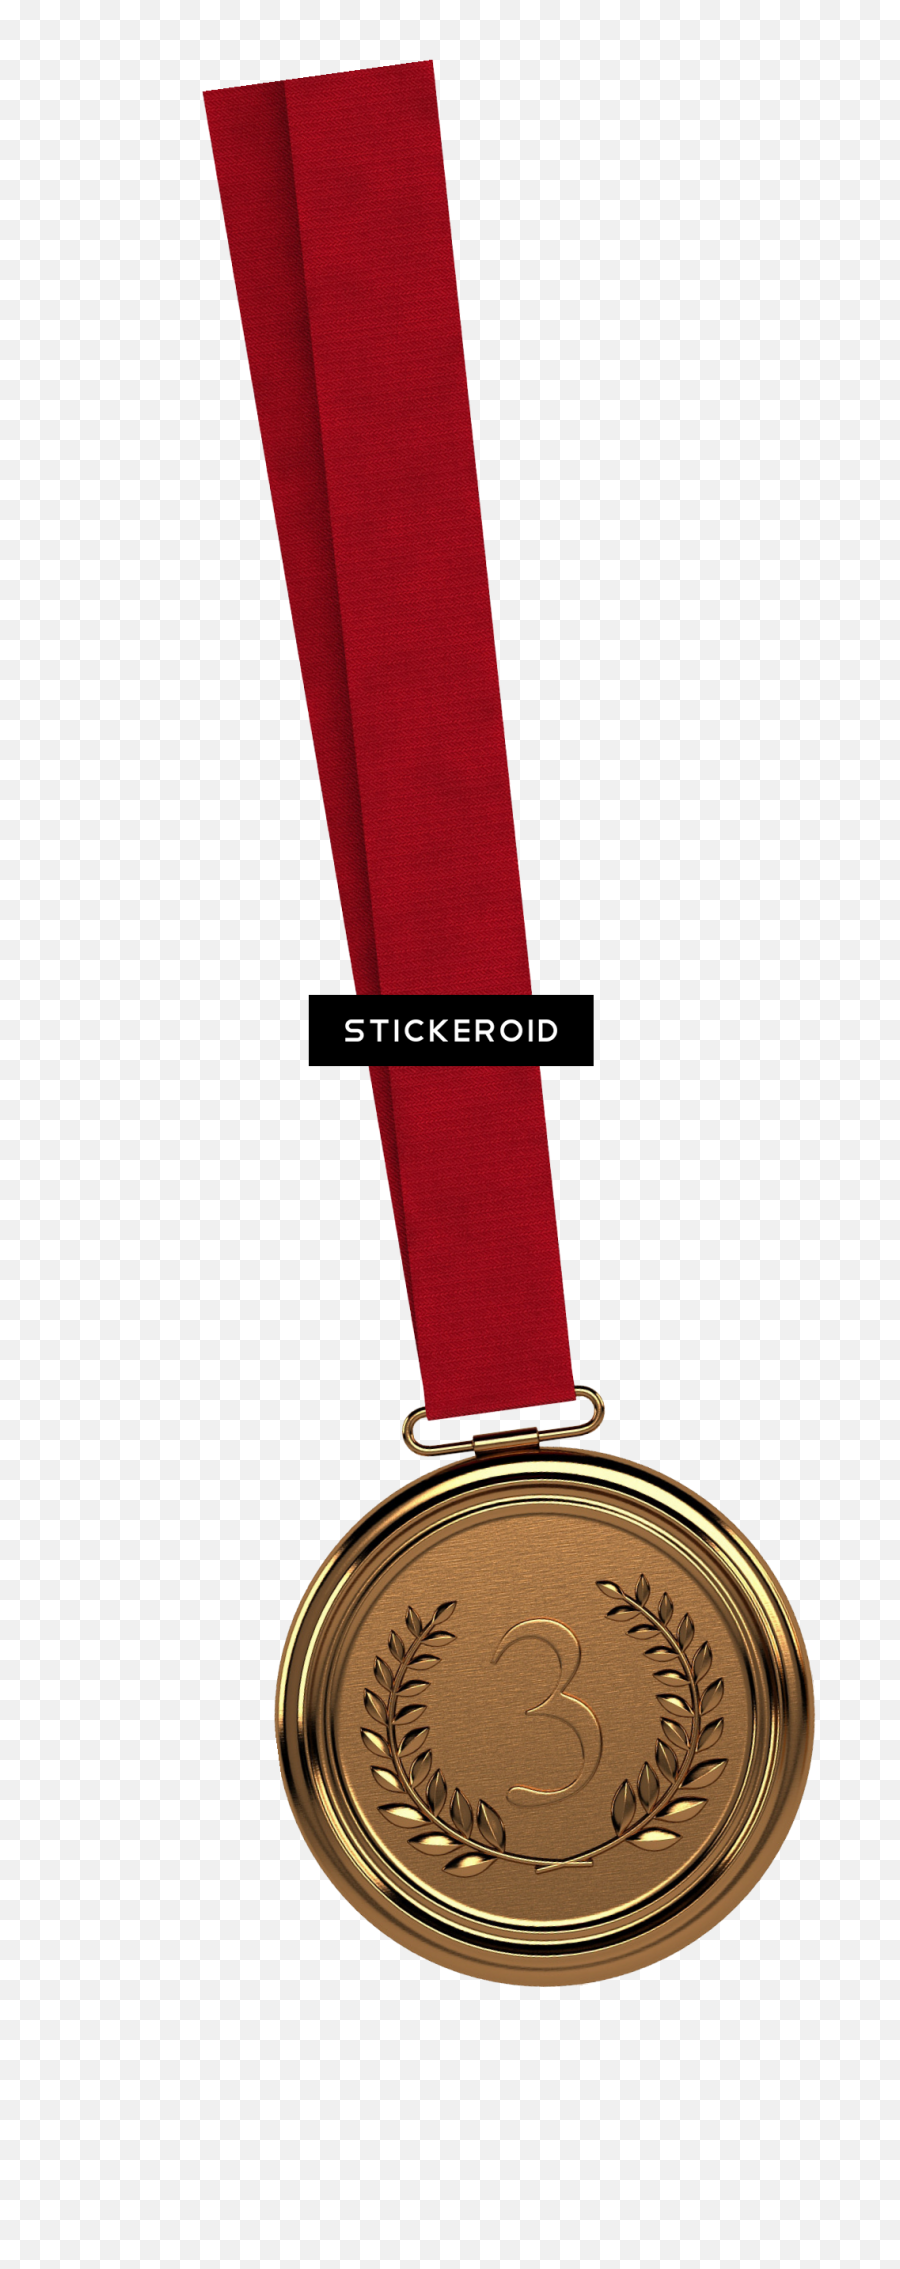 Download Gold Medal Png Image With No Background - Pngkeycom Gold Medal,Gold Medal Png